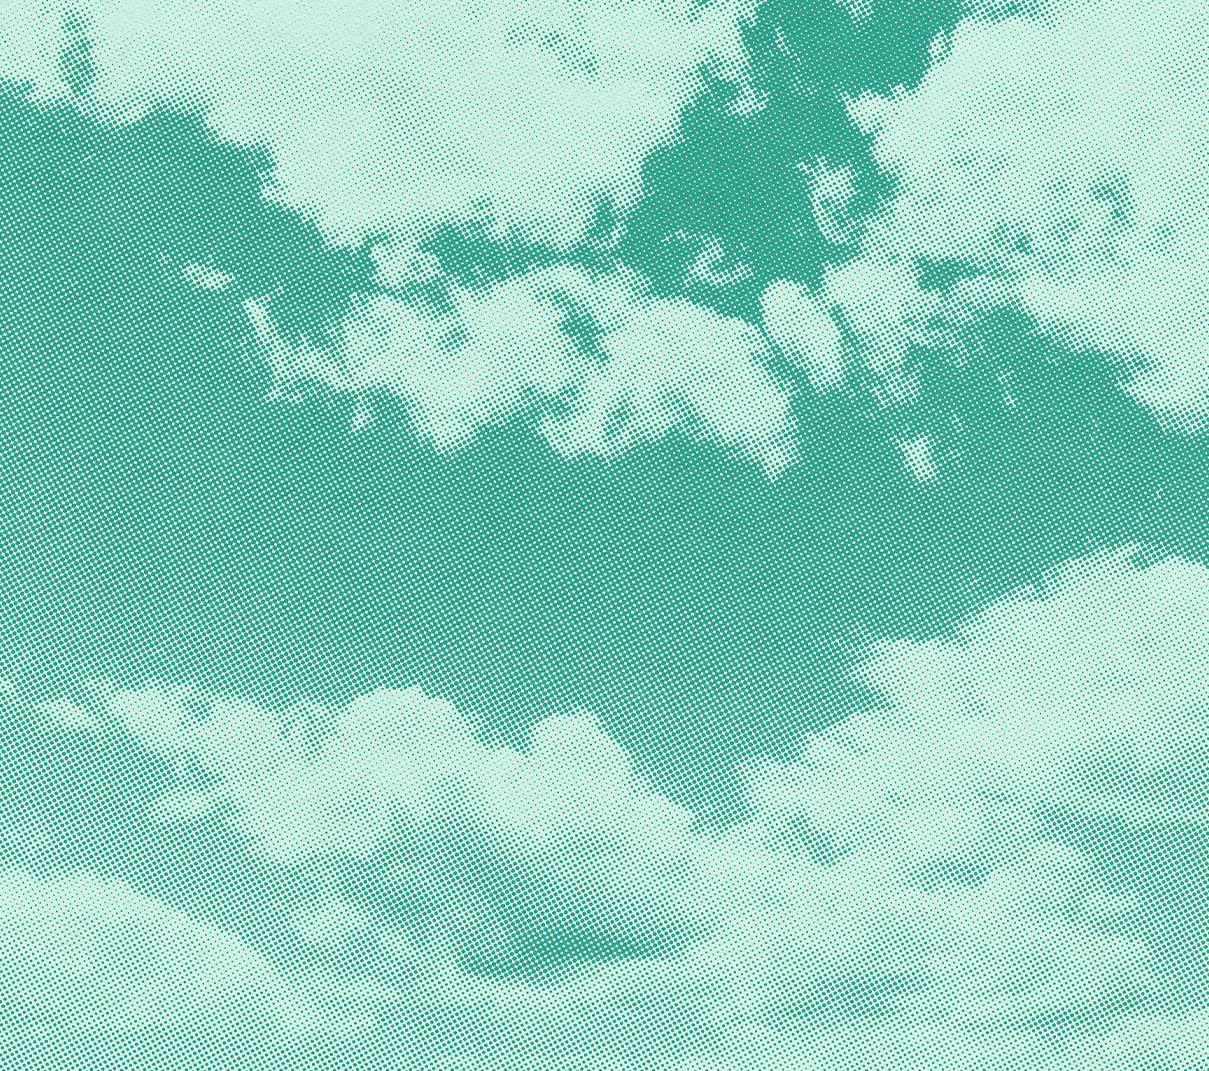 Halftone image of clouds in mint and teal